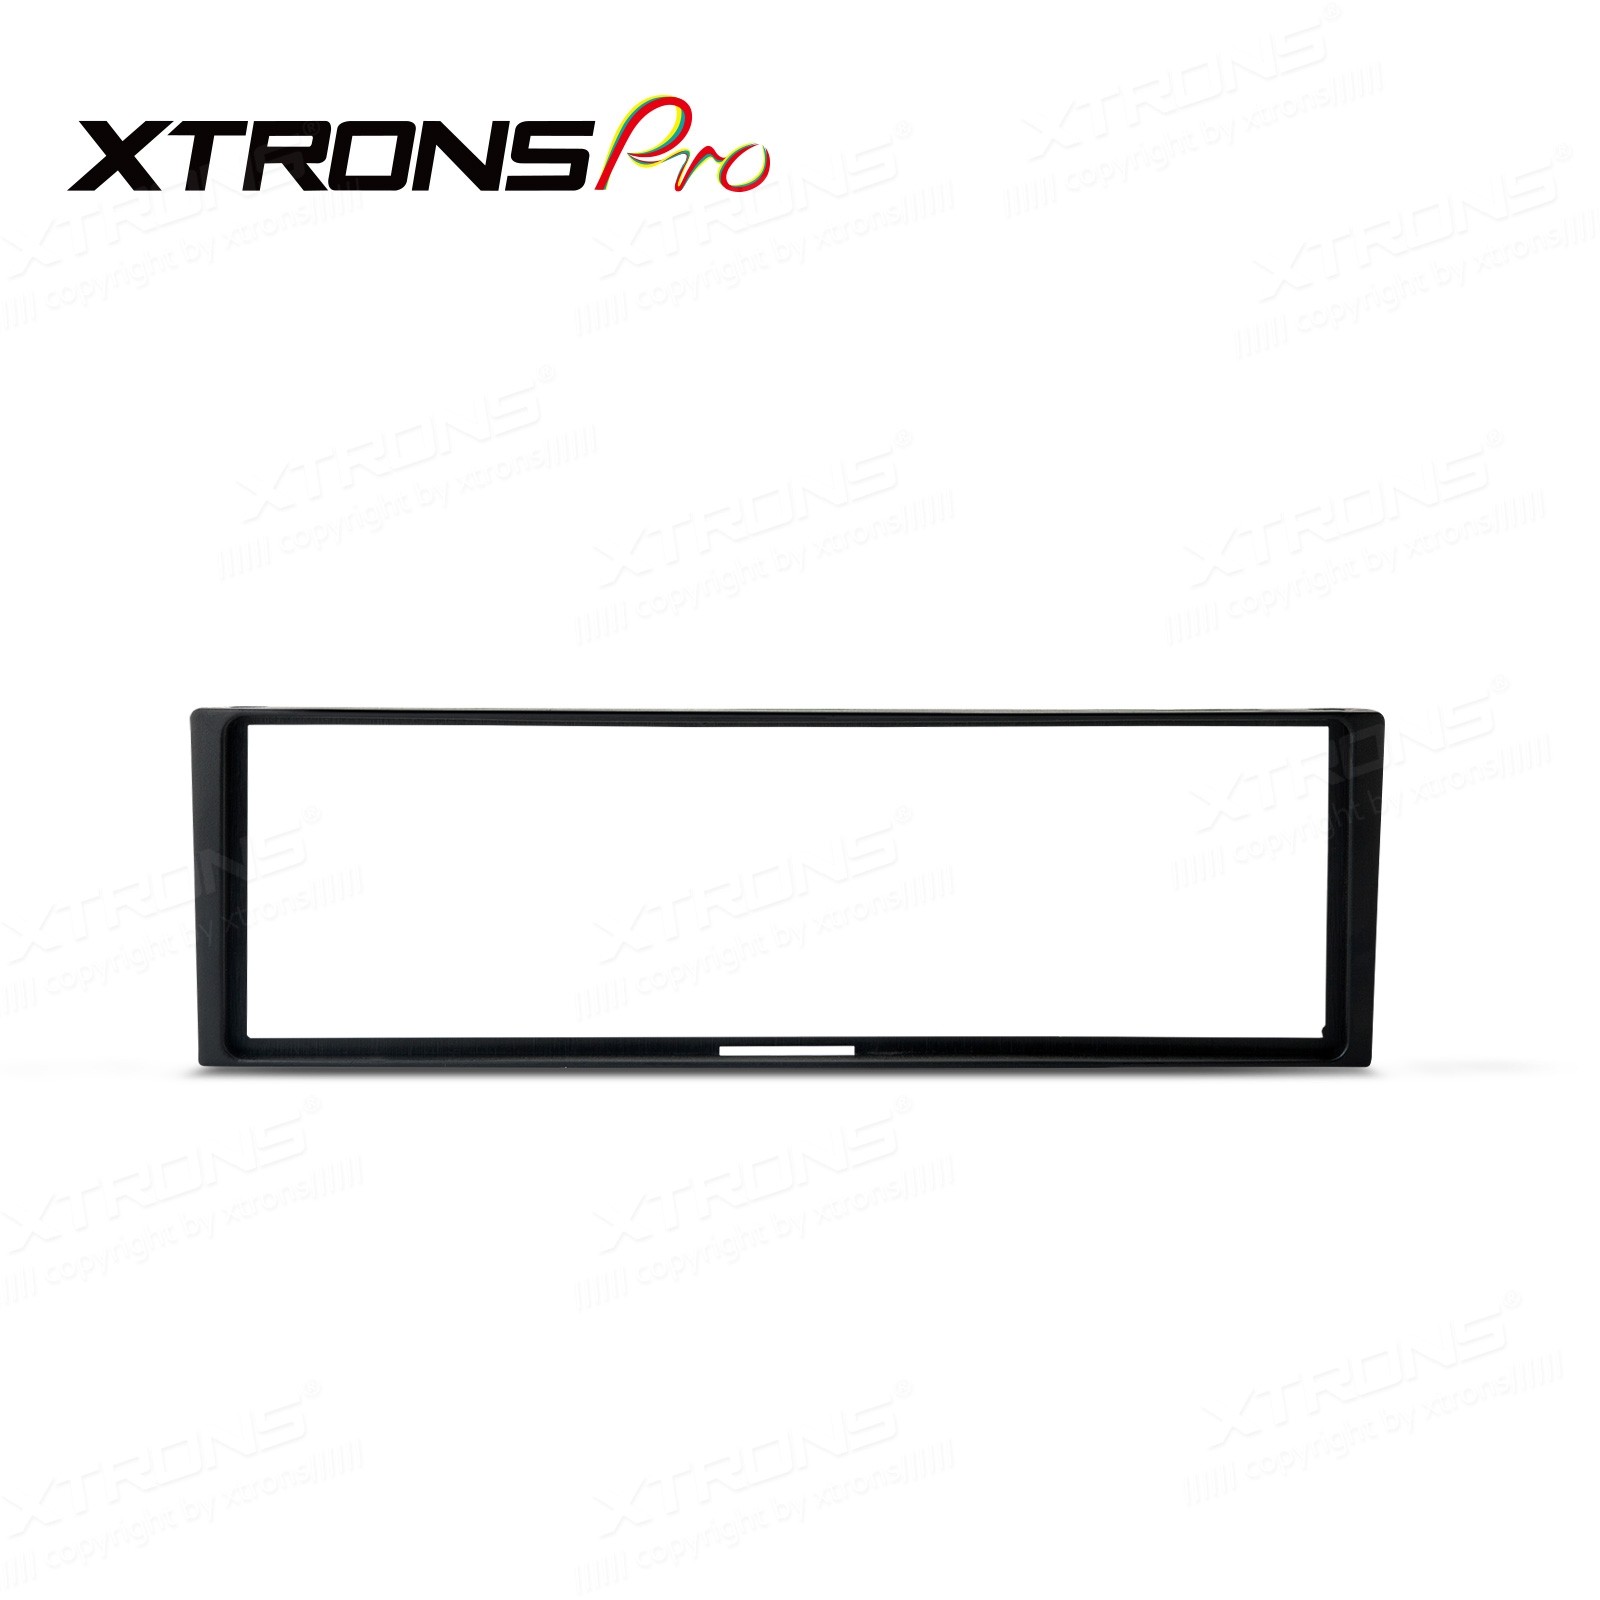 RENAULT Clio 2005-2012 | Modus 2004-2012 | Megane 2003-2009 | Scenic 2004-2009 1-DIN Car Stereo  Din Facia Panel Fitting Surround XTRONS PRO 11-032